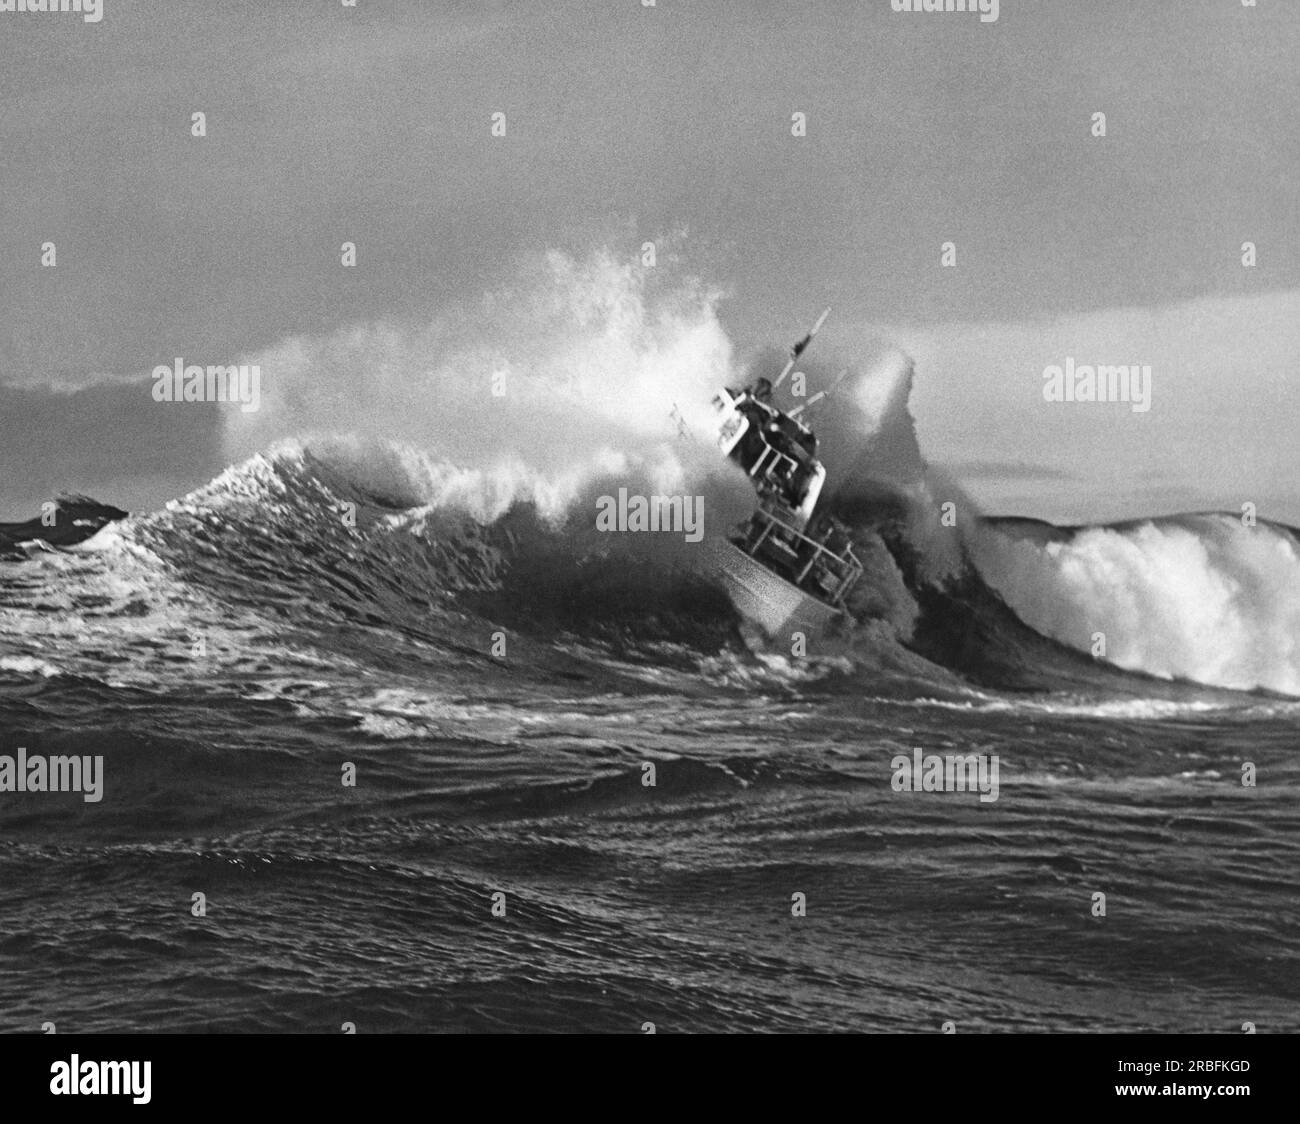 United States:  c. 1954 A Coast Guard surf rescue boat plunges into a breaking wave. Stock Photo